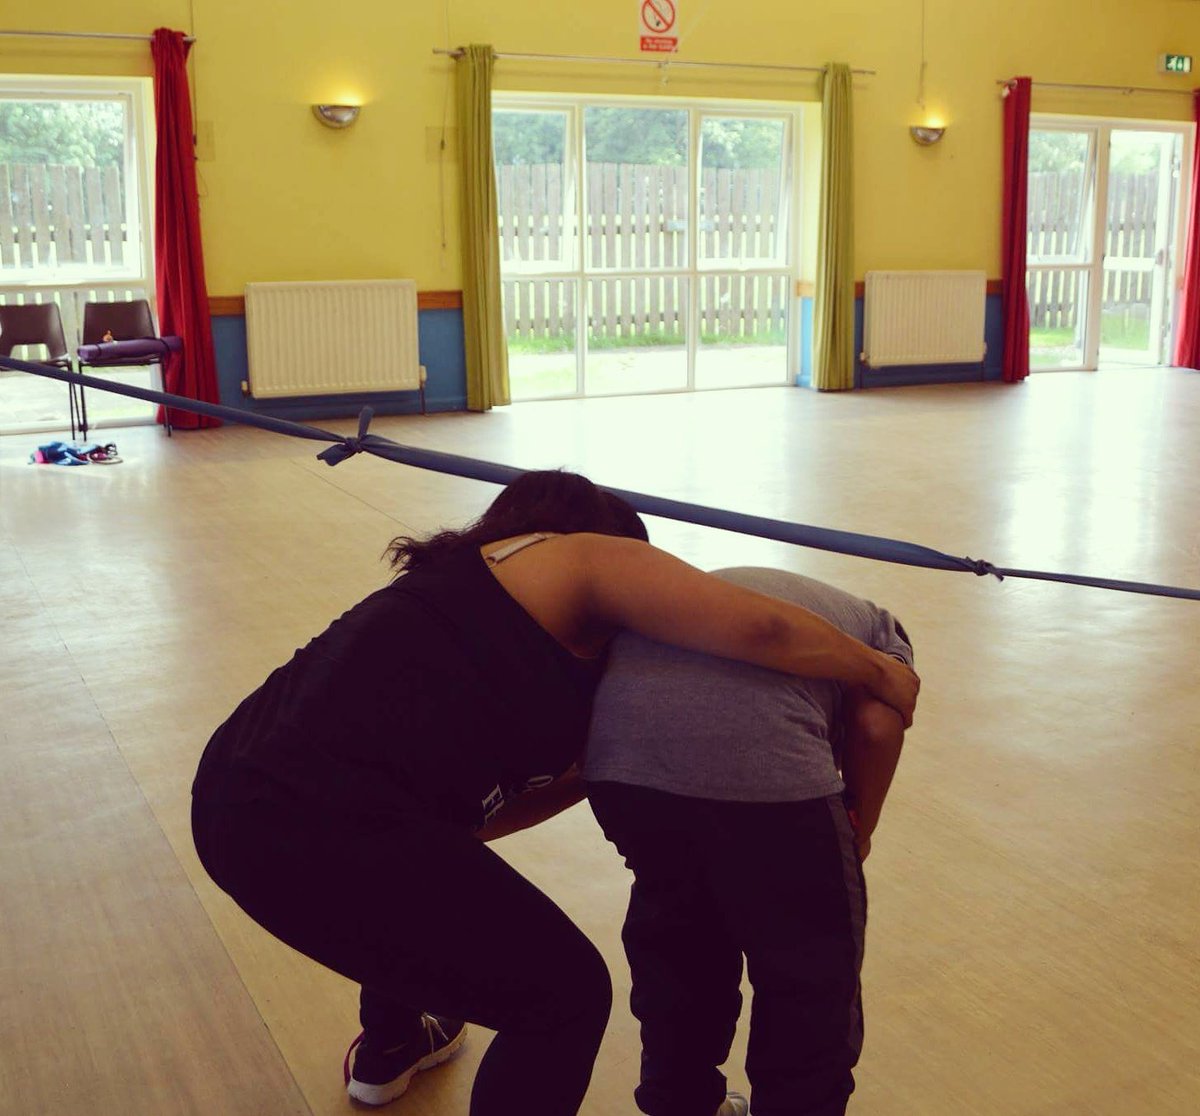 Not easy doing #boxercise. In our #specialneeds, we are In it together

#autism #notalone #empowerdisability #solihull